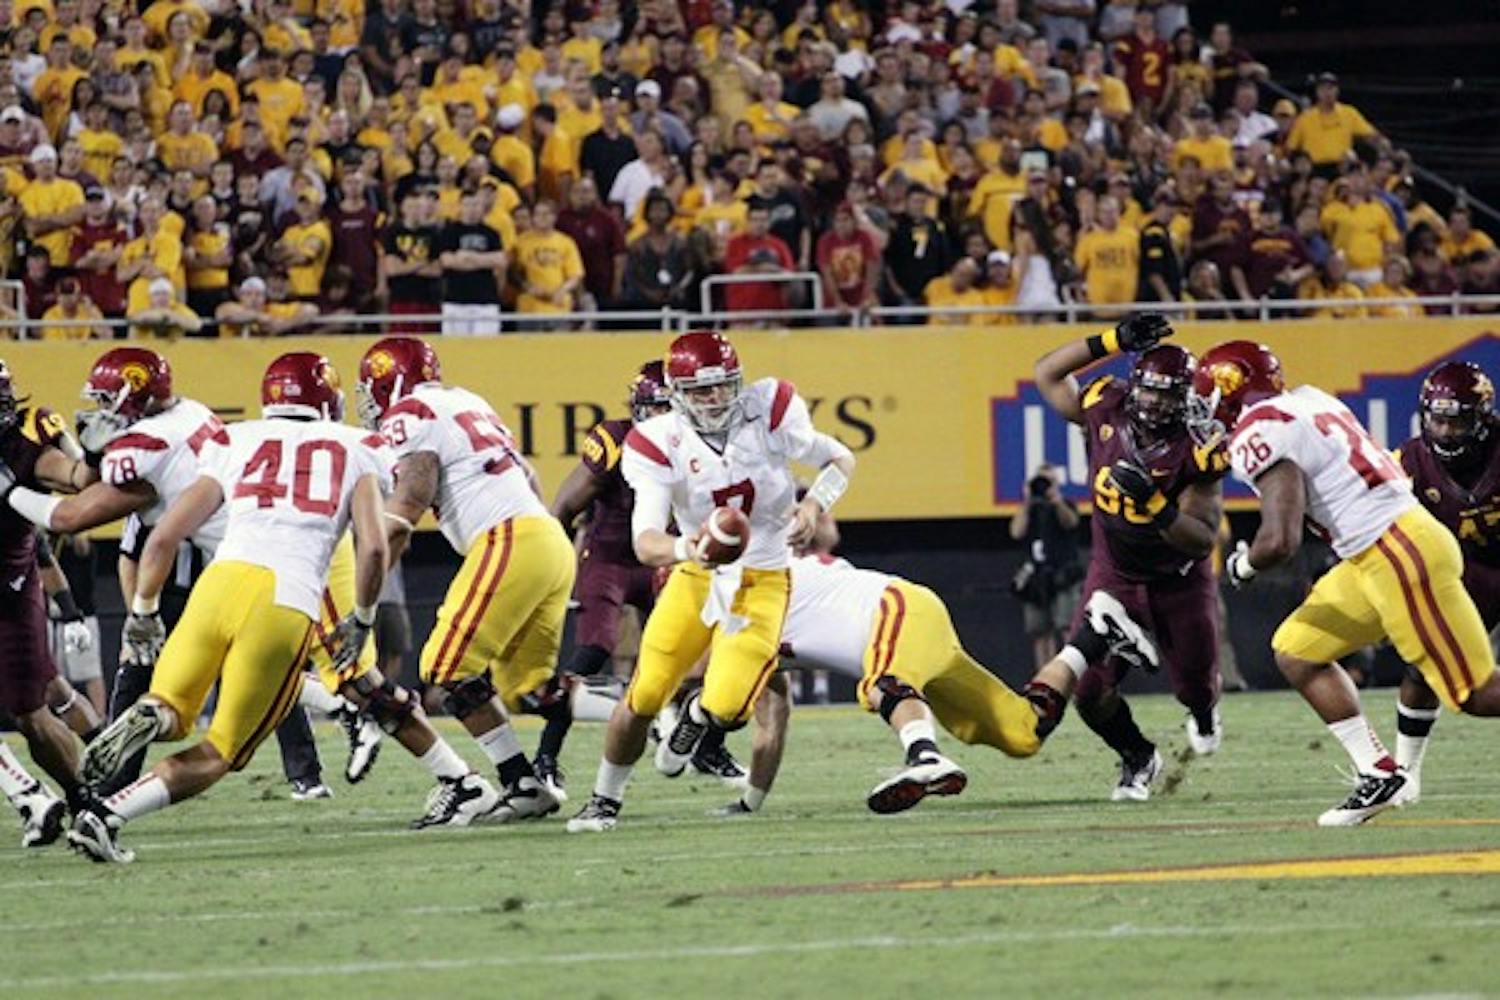 DOWN TO MISTAKES: USC junior quarterback Matt Barkley extends for a handoff to redshirt senior Marc Tyler in the Trojan’s 43-22 loss to ASU. Crucial penalties and untimely turnovers contributed to the end of USC’s 11-game winning streak against the Sun Devils. (Photo by Beth Easterbrook)